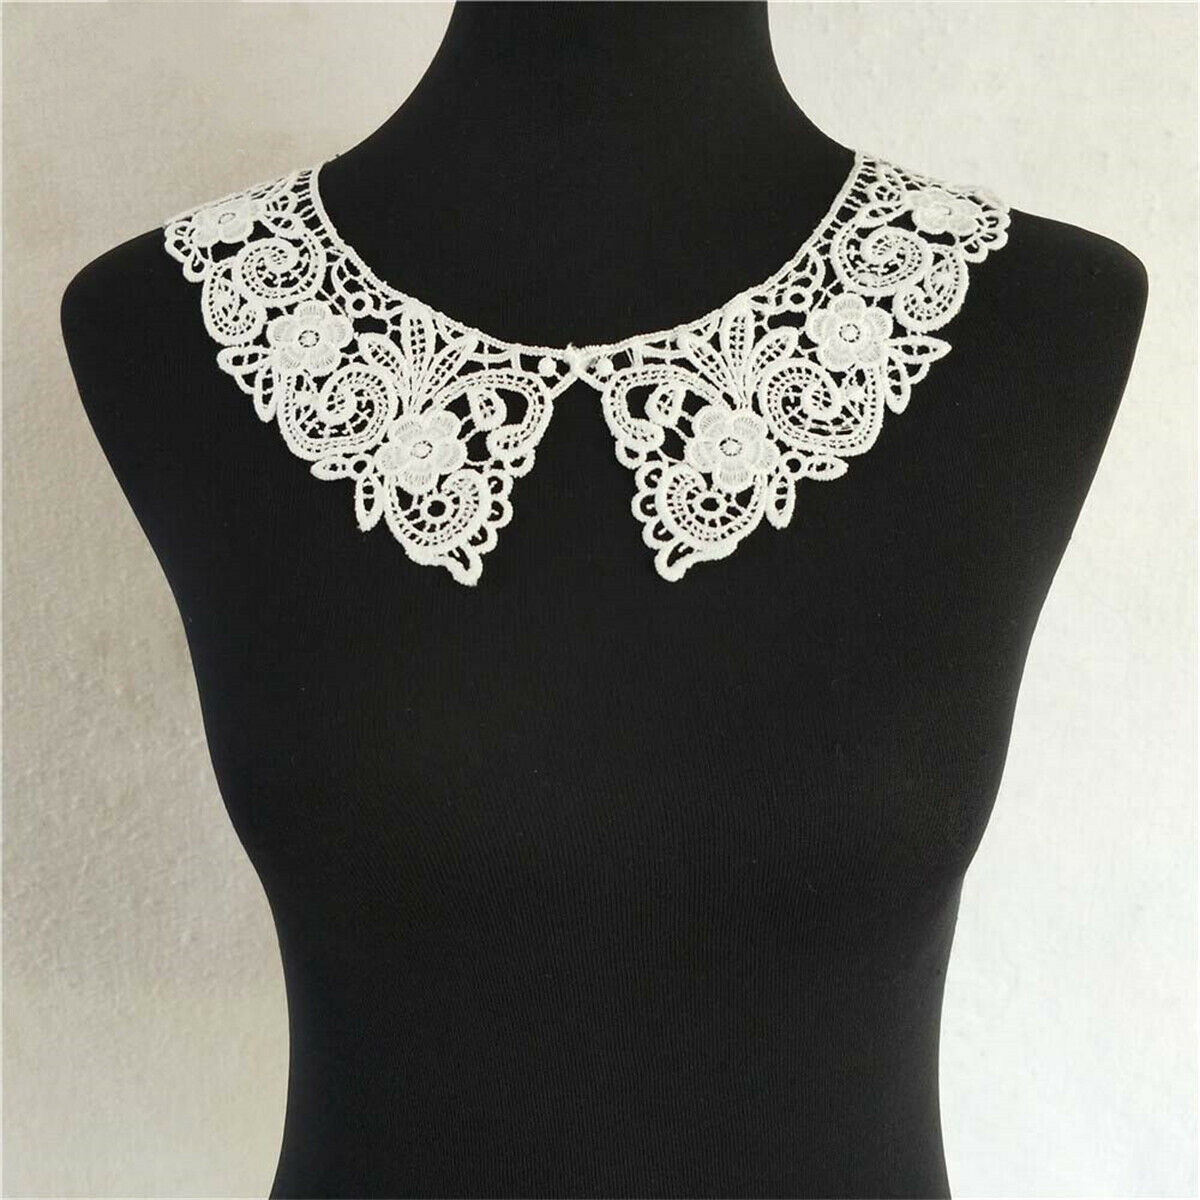 White Collar Trims Flower Embroidery Neckline Sewing Applique Patch Fabric Craft